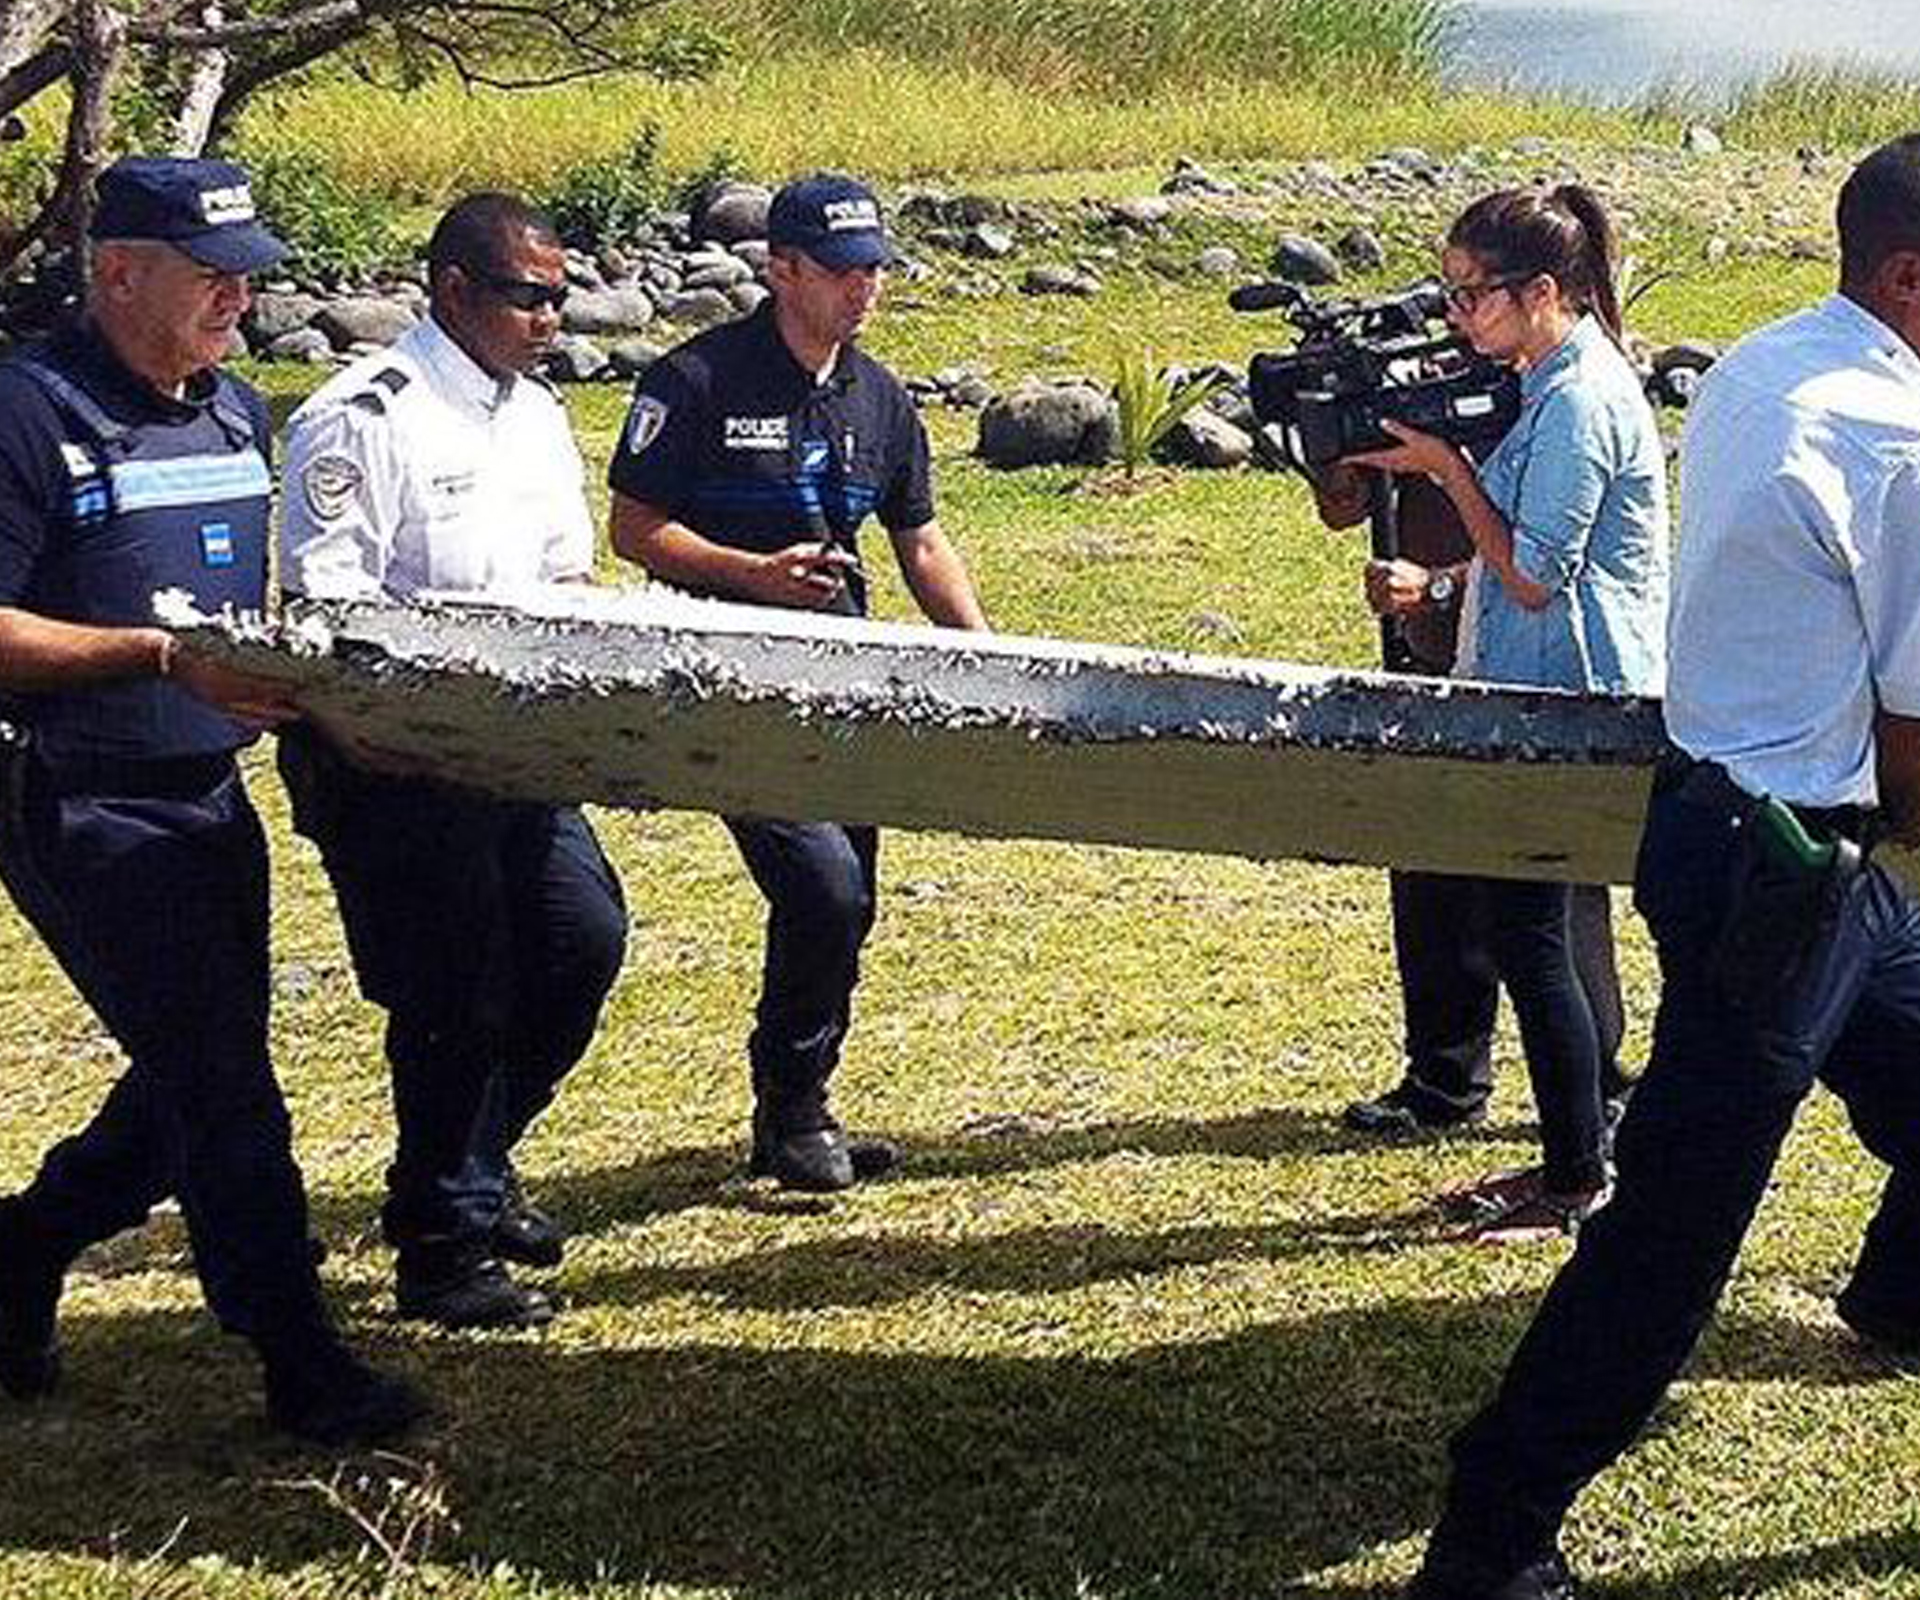 Wreckage found on island is MH370